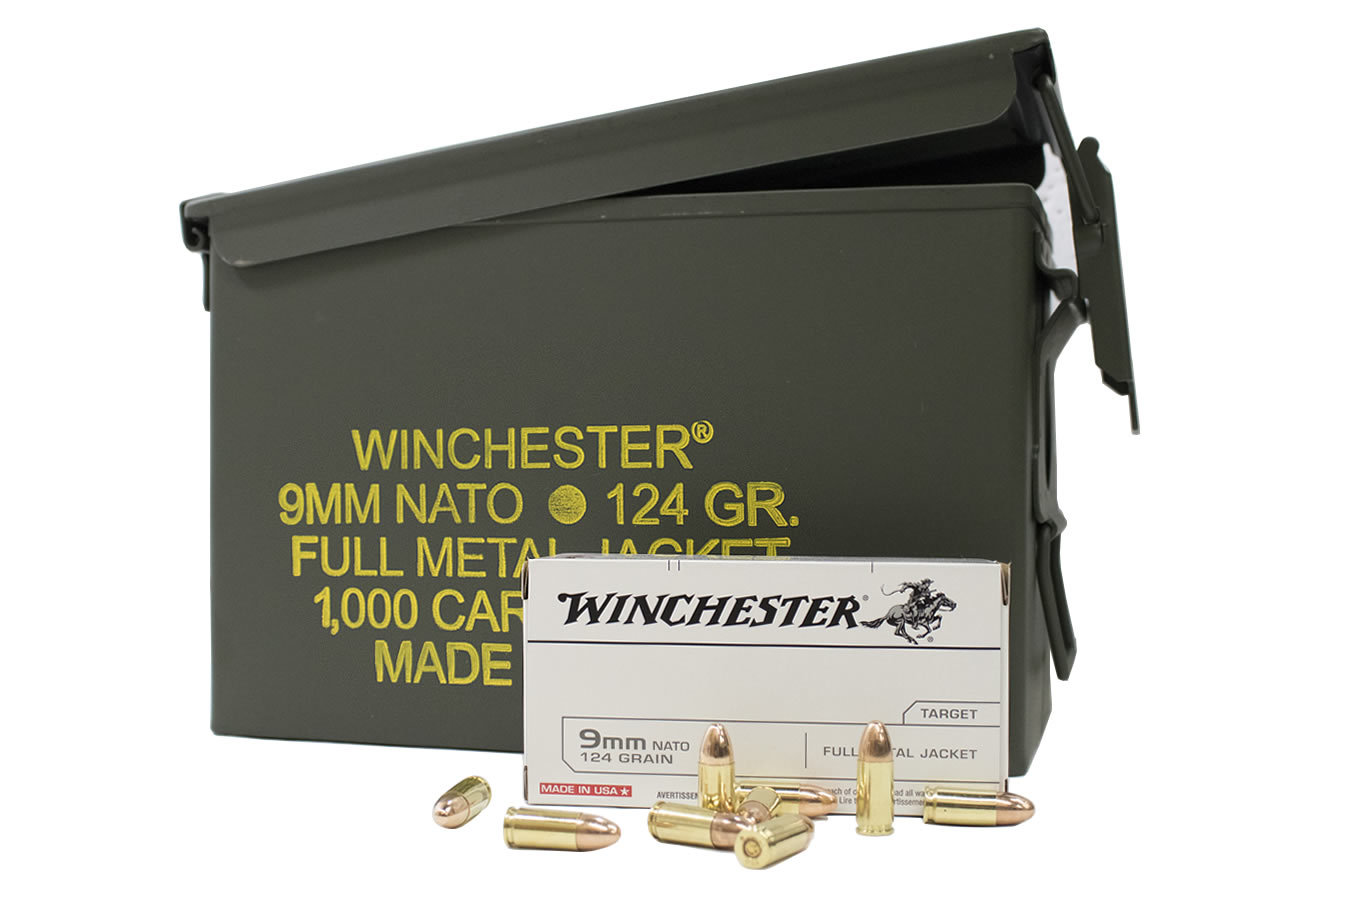 WINCHESTER AMMO 9MM 124 GR FMJ